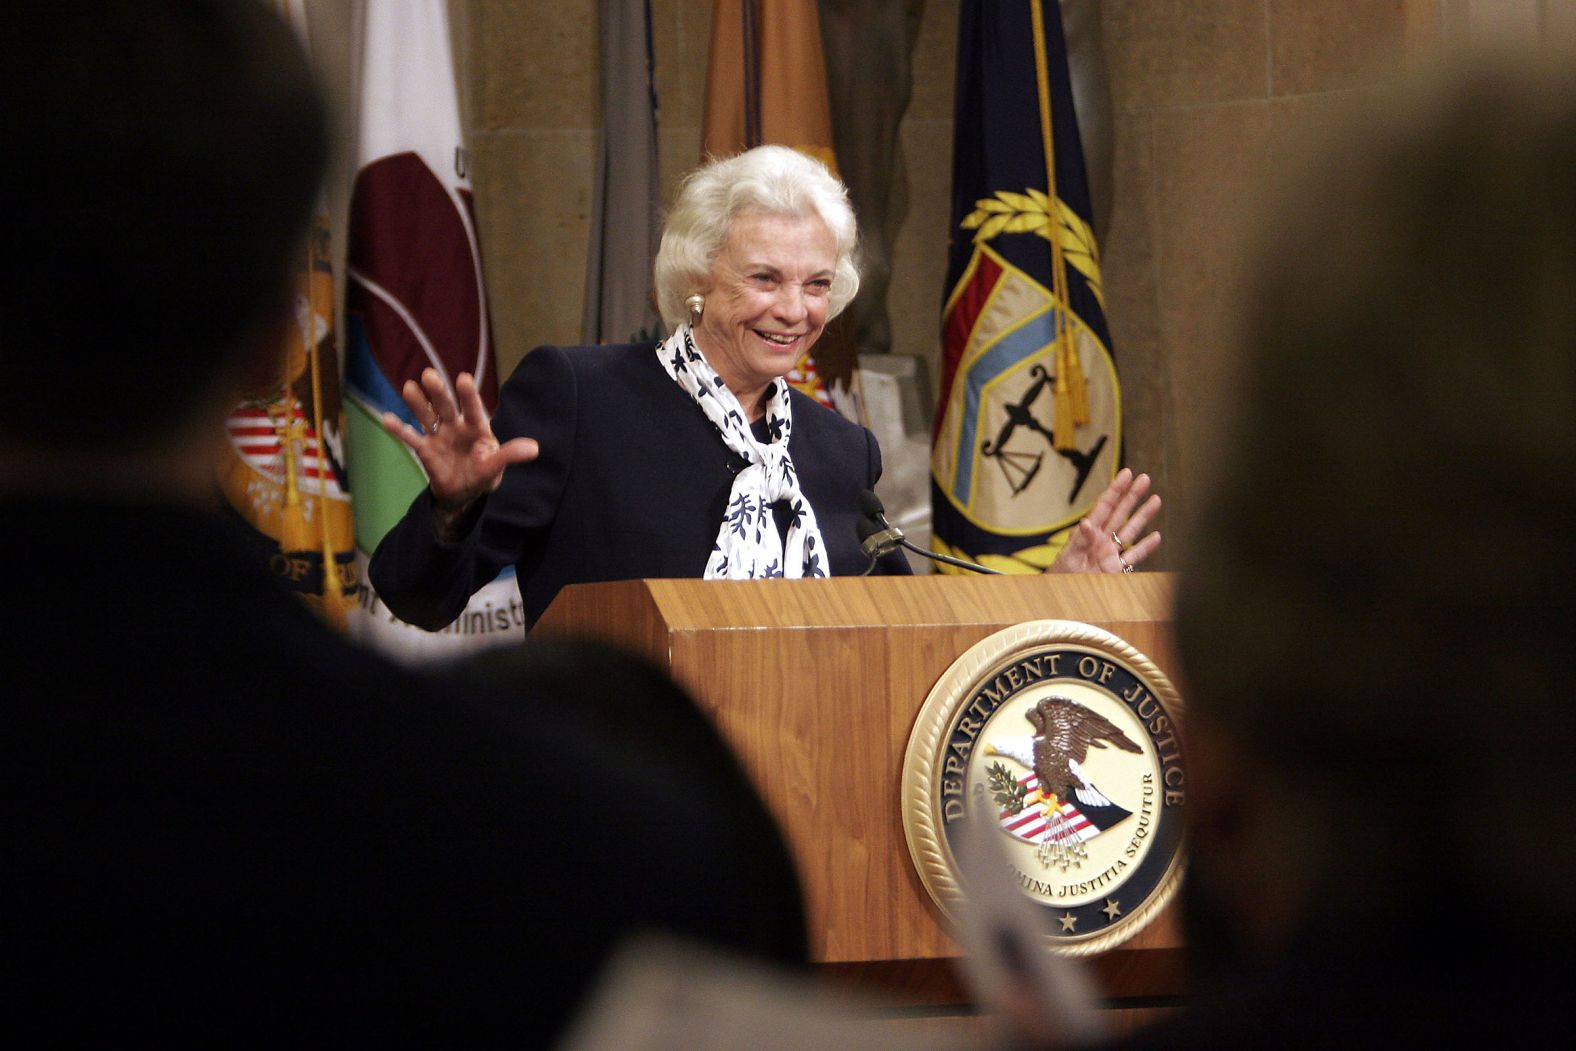 O'Connor speaks at the Justice Department in 2006 as part of an event for Women's History Month.